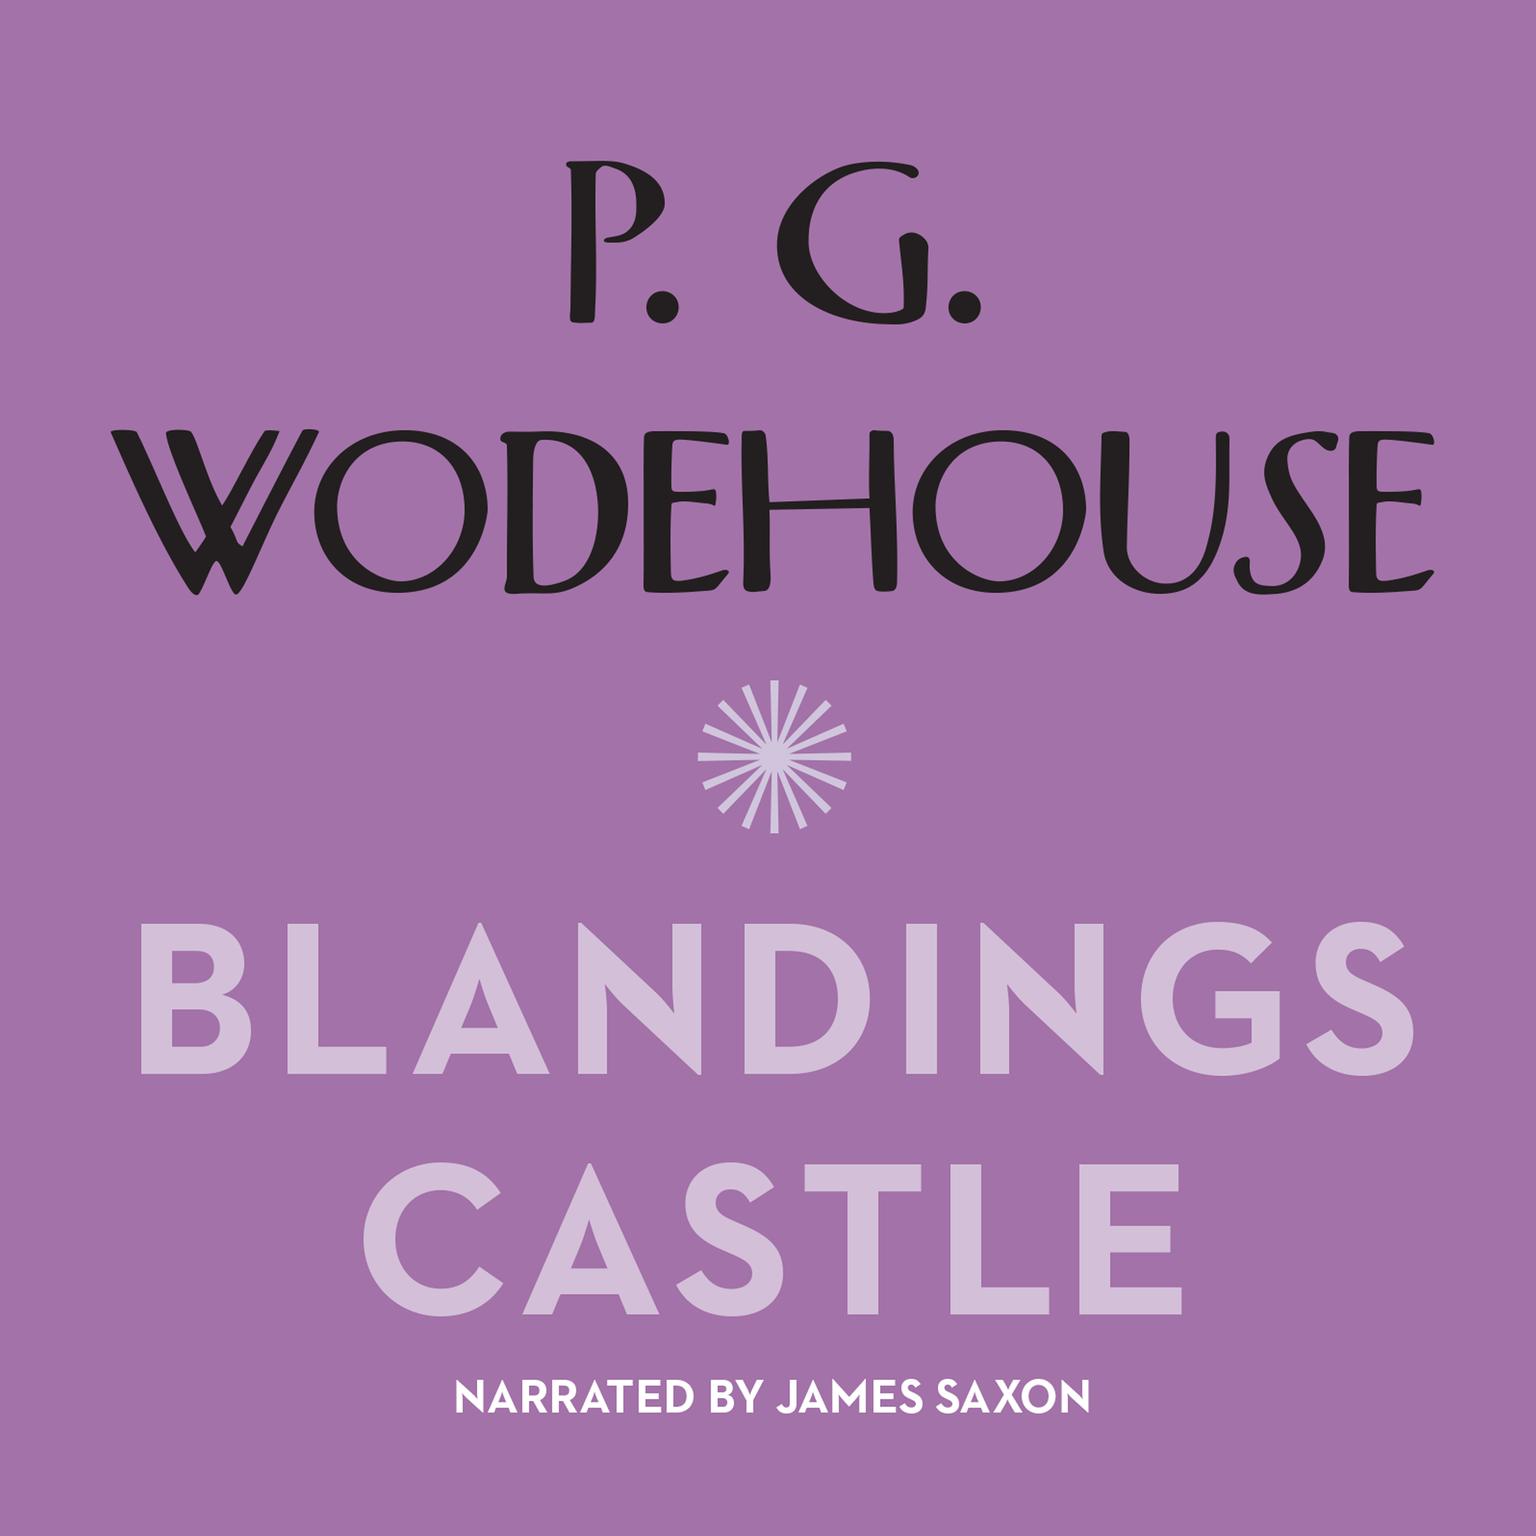 Blandings Castle and Elsewhere Audiobook, by P. G. Wodehouse